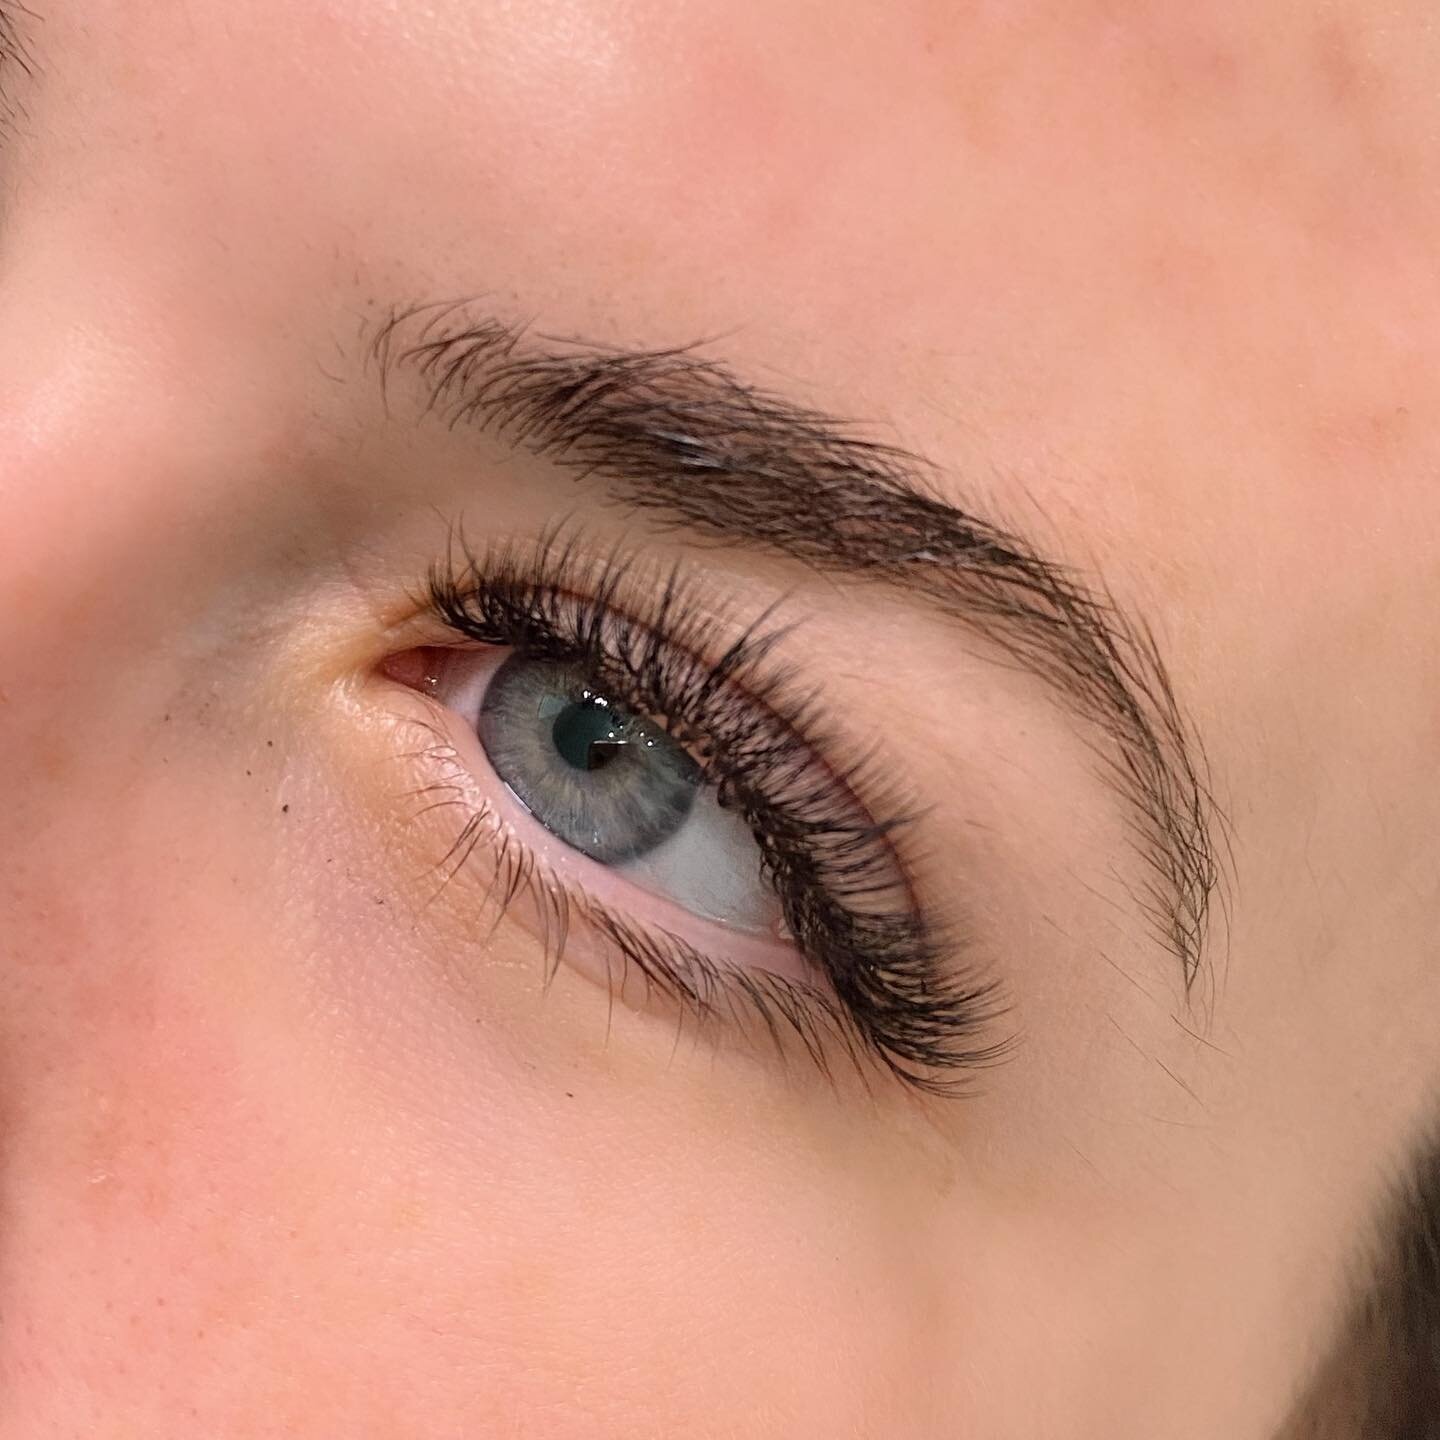 nat&middot;​u&middot;​ral 

To make people wonder whether you have lash extensions or not. 

#lashes #lash #lashesextension #natural #naturallashes #lashartist #naturalbeauty #beauty #eye #eyelashextensions #monat #smallbusiness #rocklinlashes #rosev